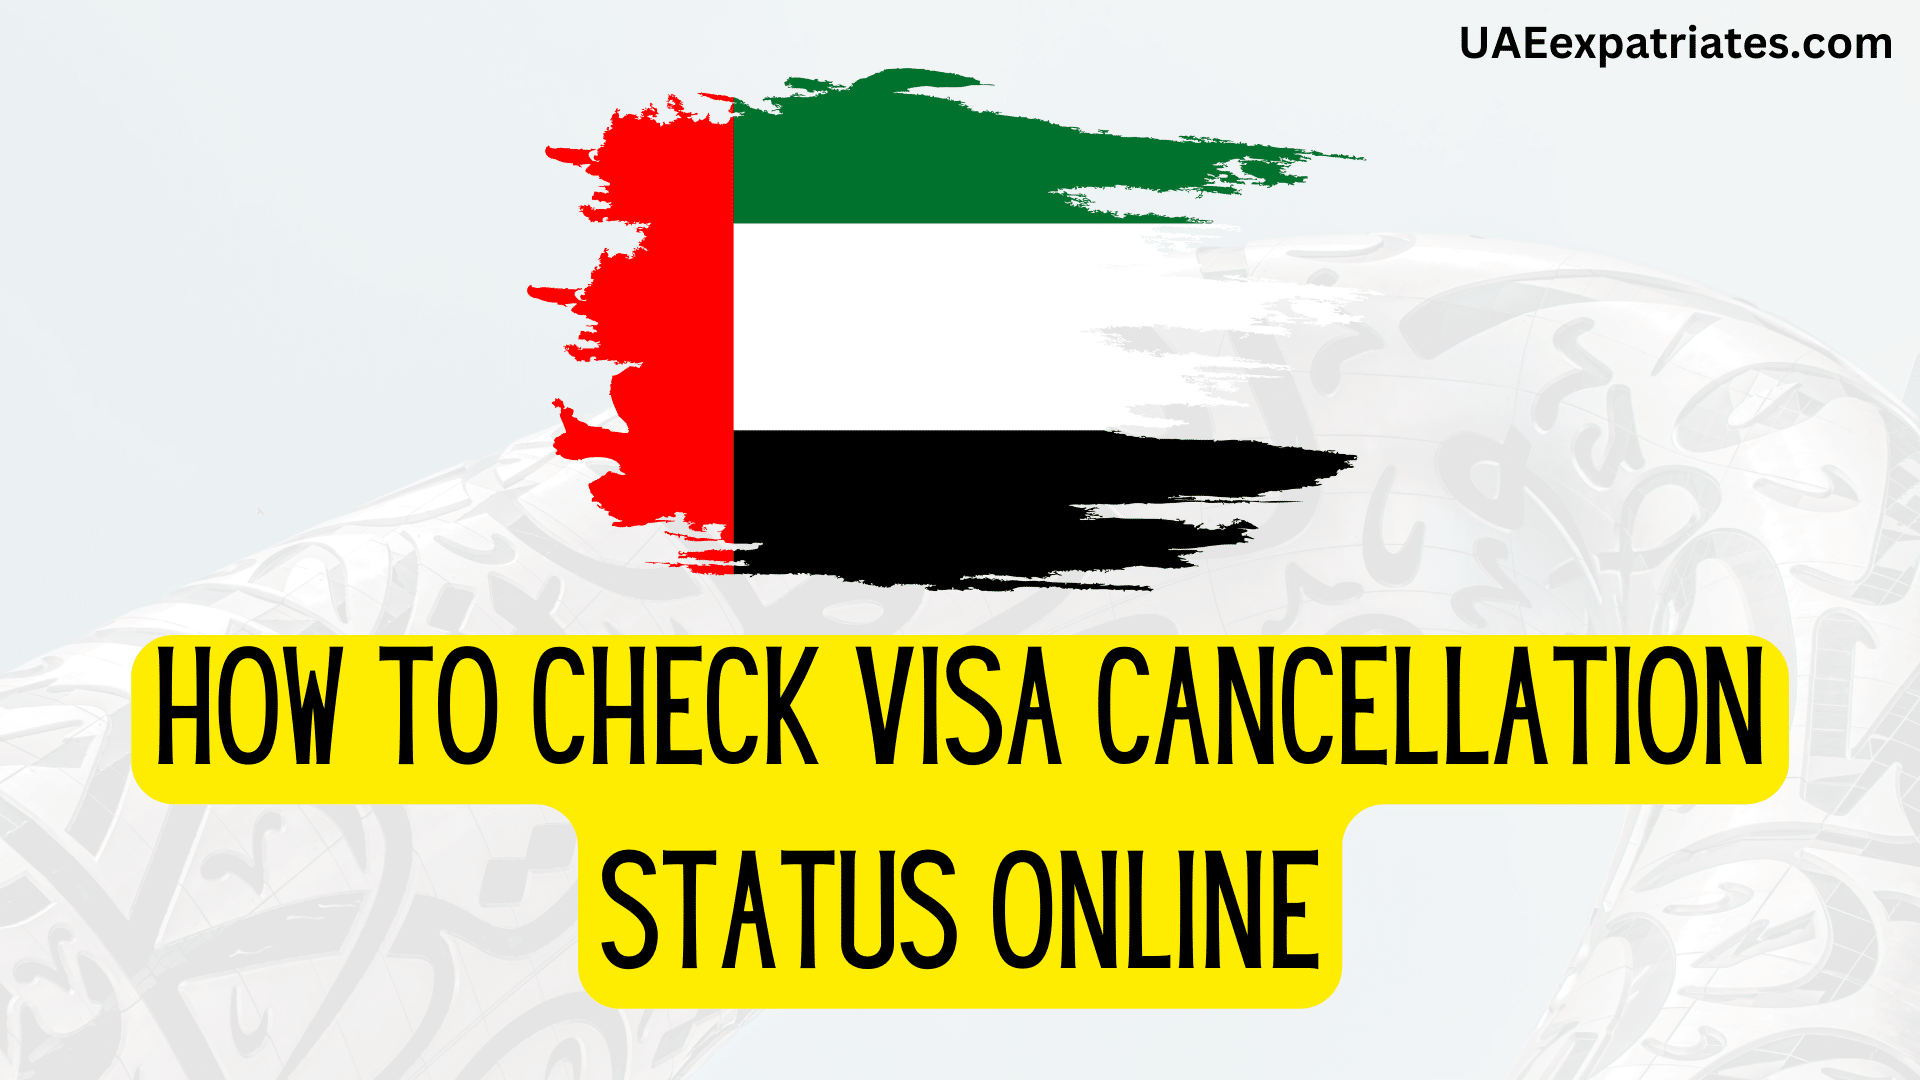 HOW TO CHECK VISA CANCELLATION STATUS ONLINE